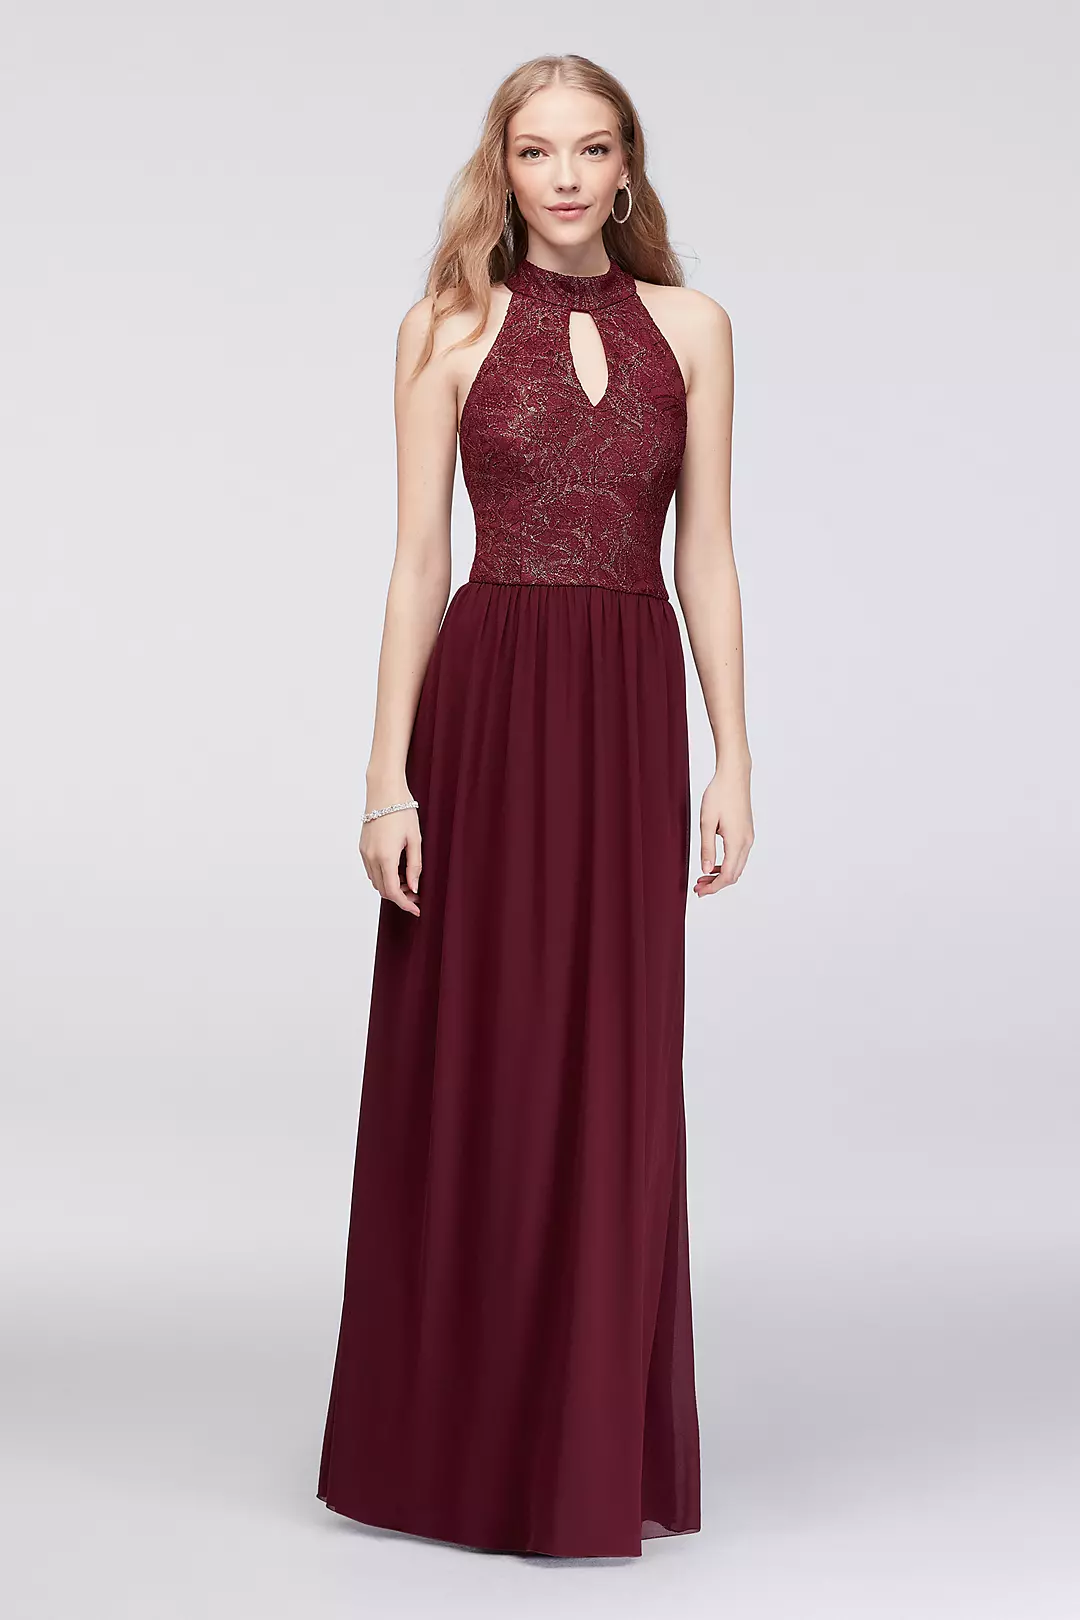 Lace and Chiffon Halter Gown with Back Detail Image